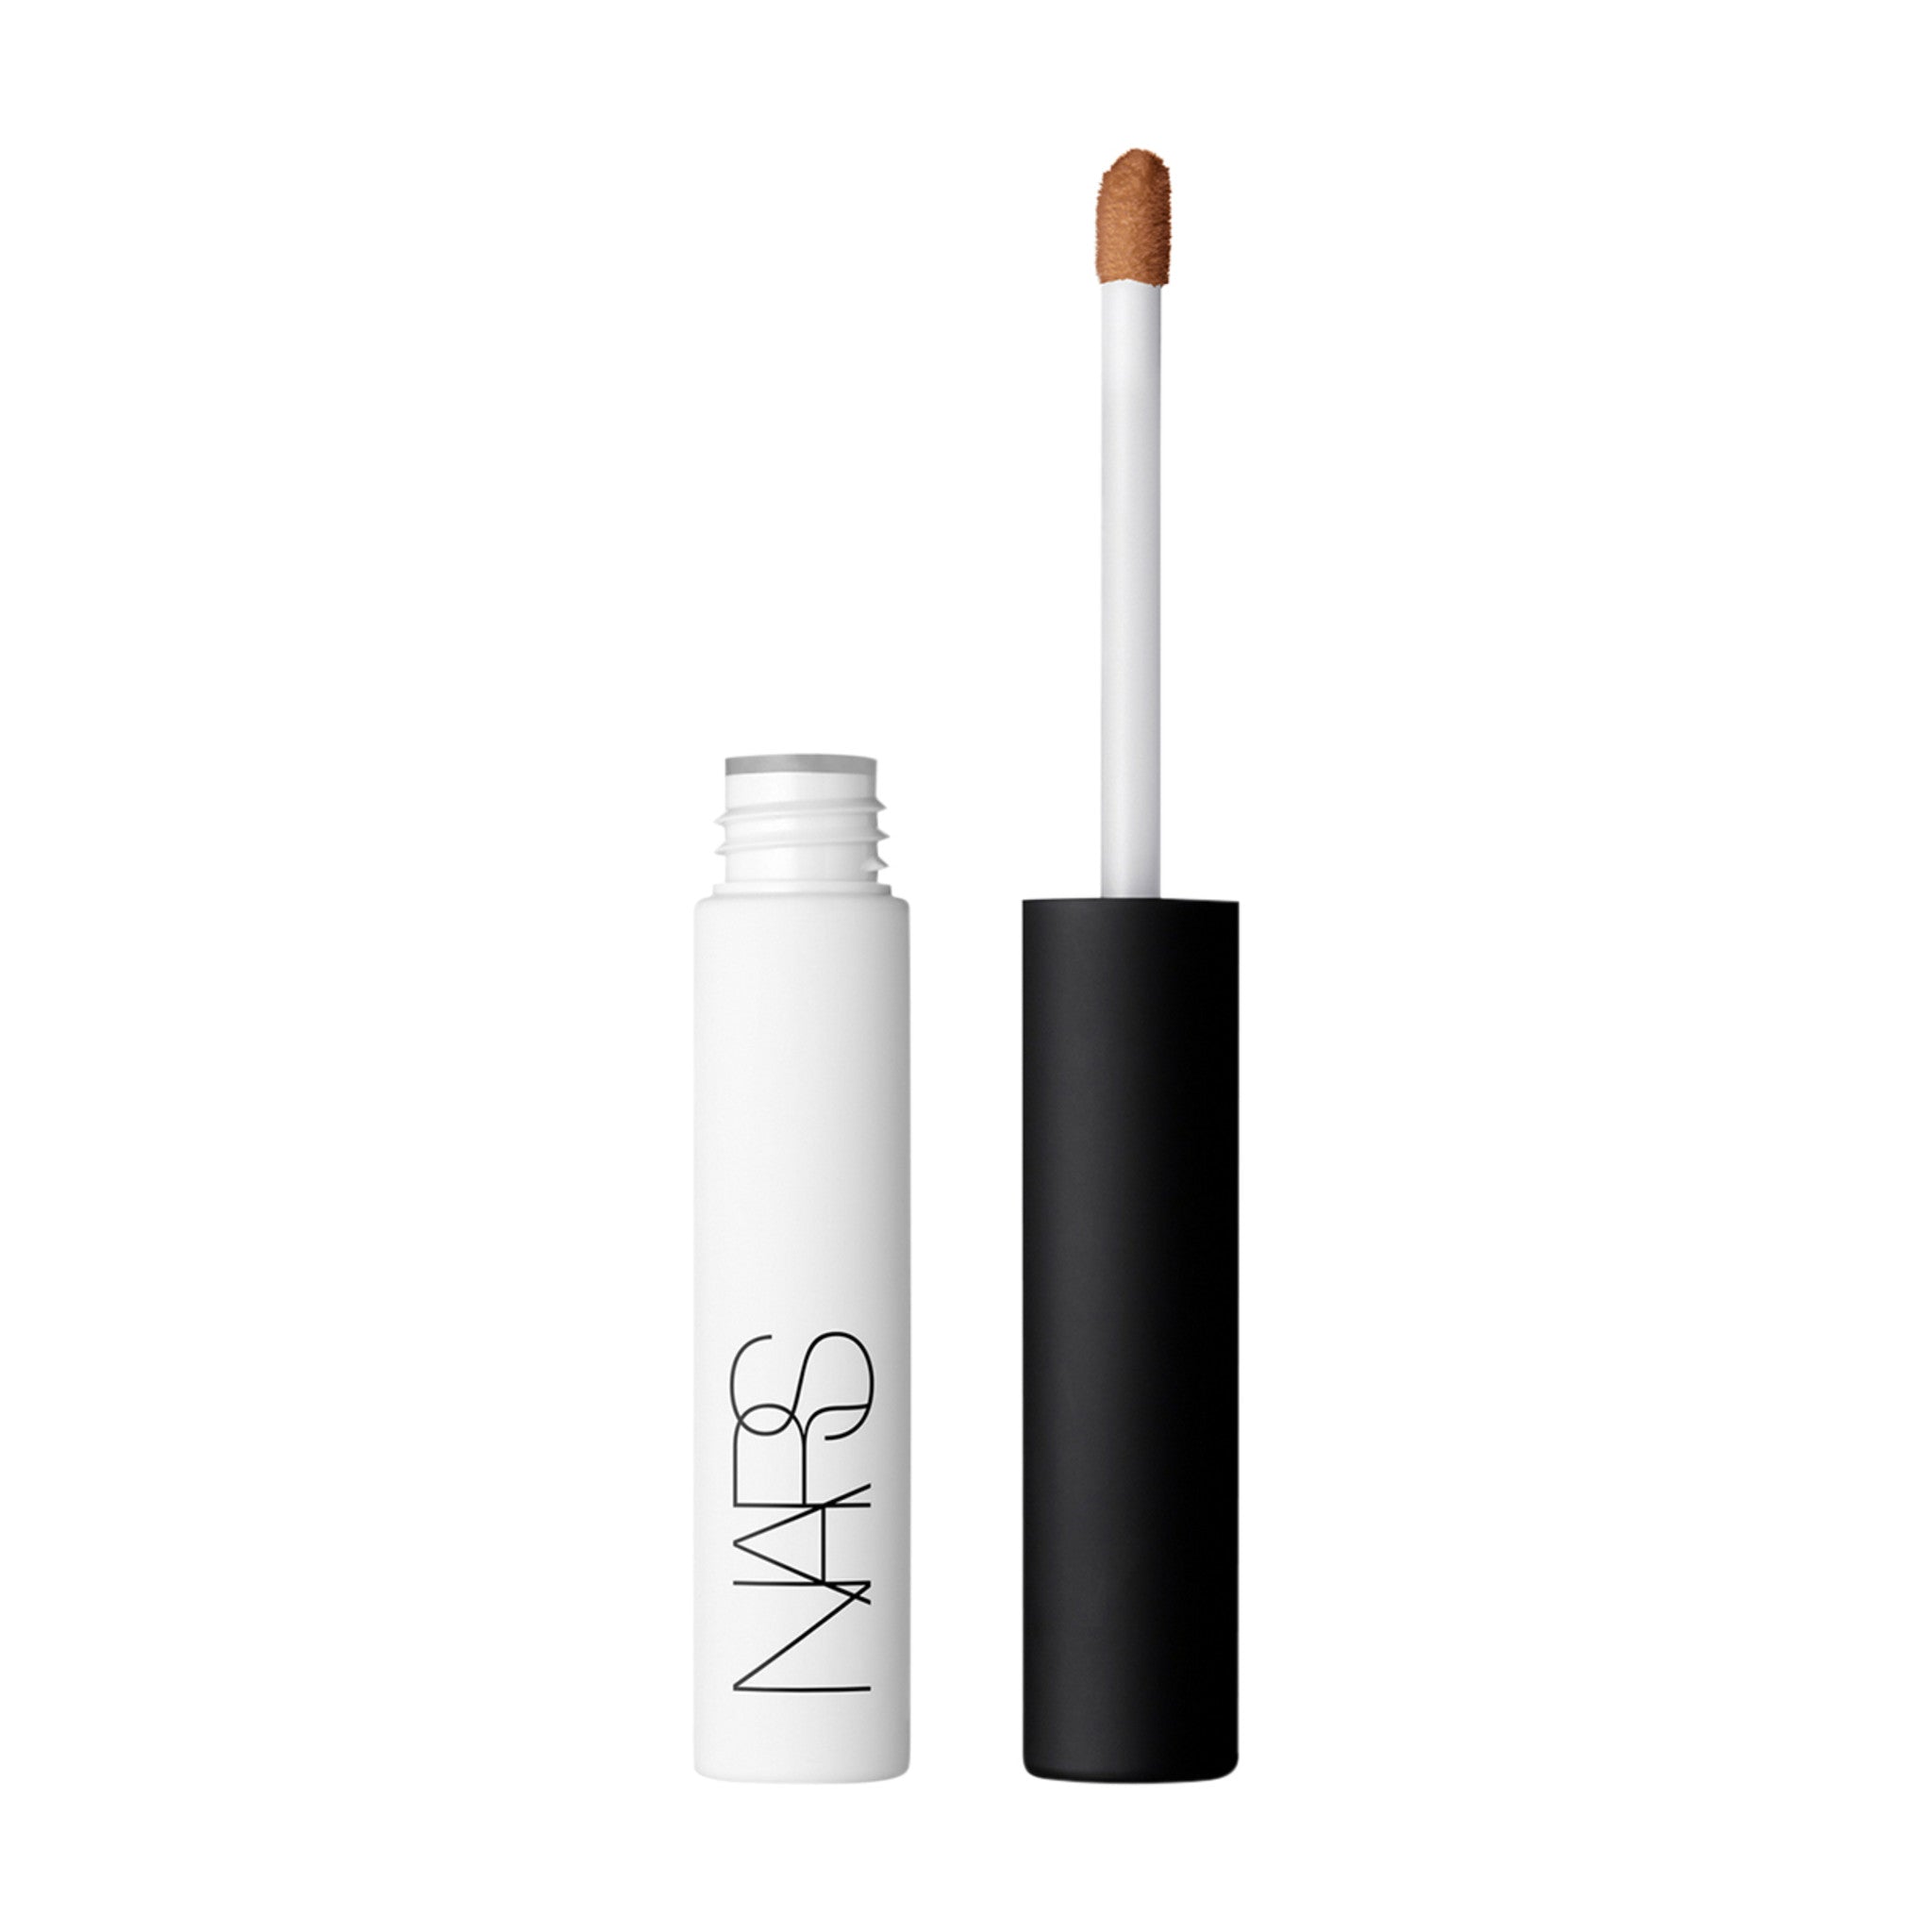 Nars Smudge Proof Eyeshadow Base Color/Shade variant: Dark main image. This product is for deep complexions